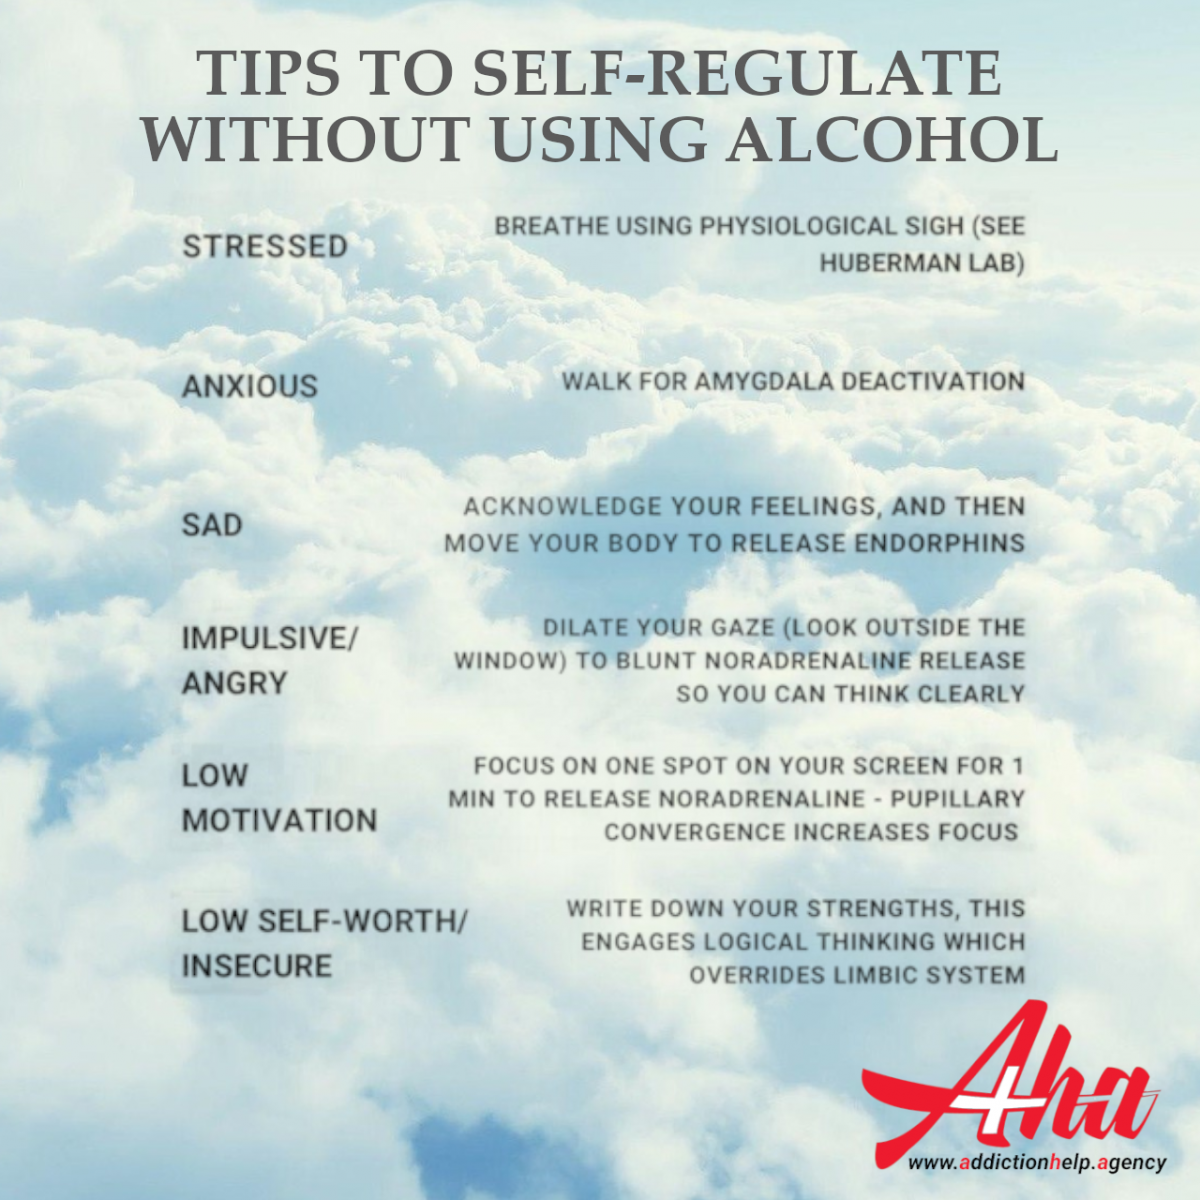 self-regulate without using alcohol